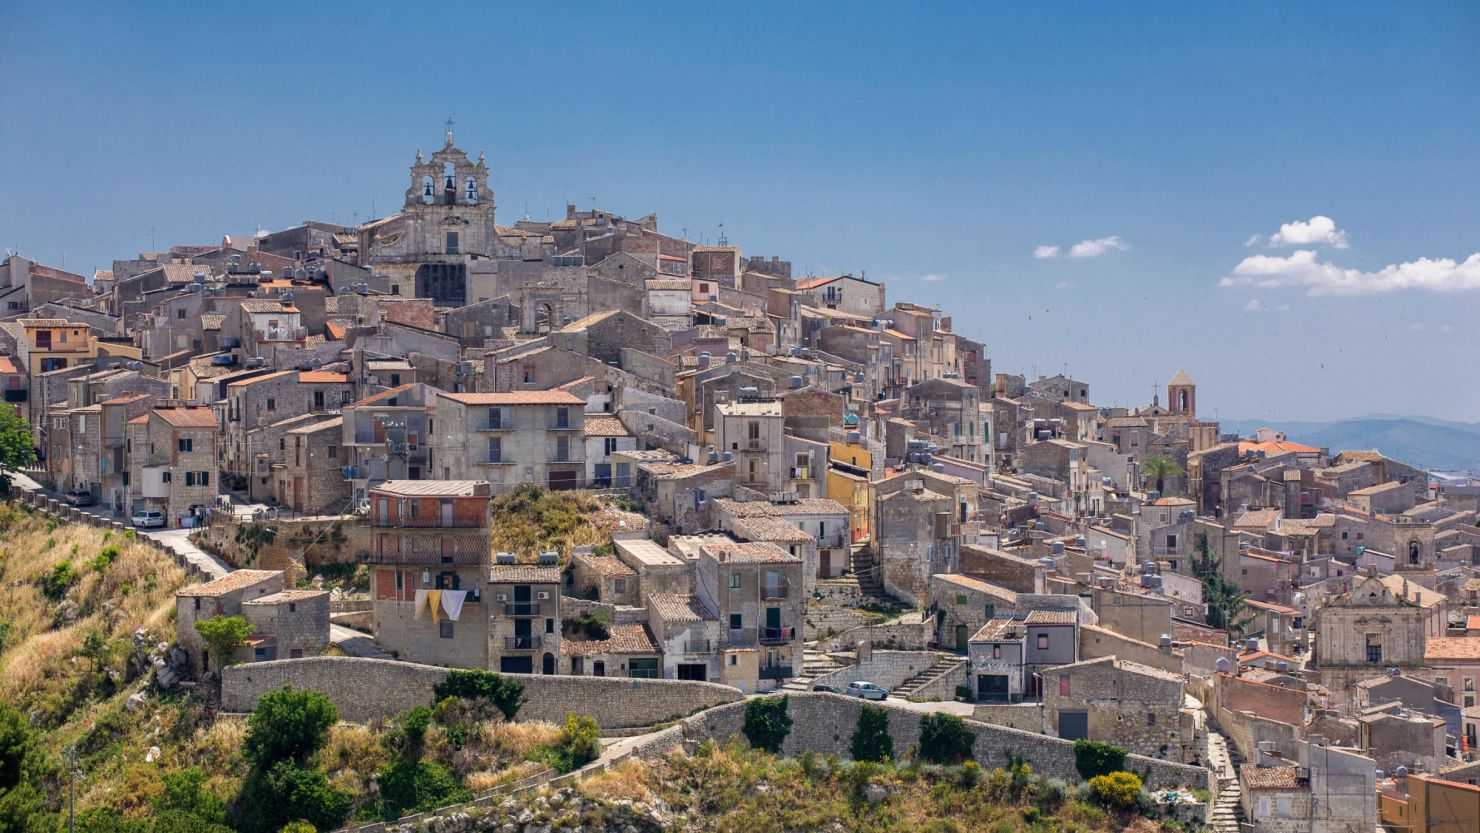 Mussomeli is one of Sicily's most popular towns for €1 homes.